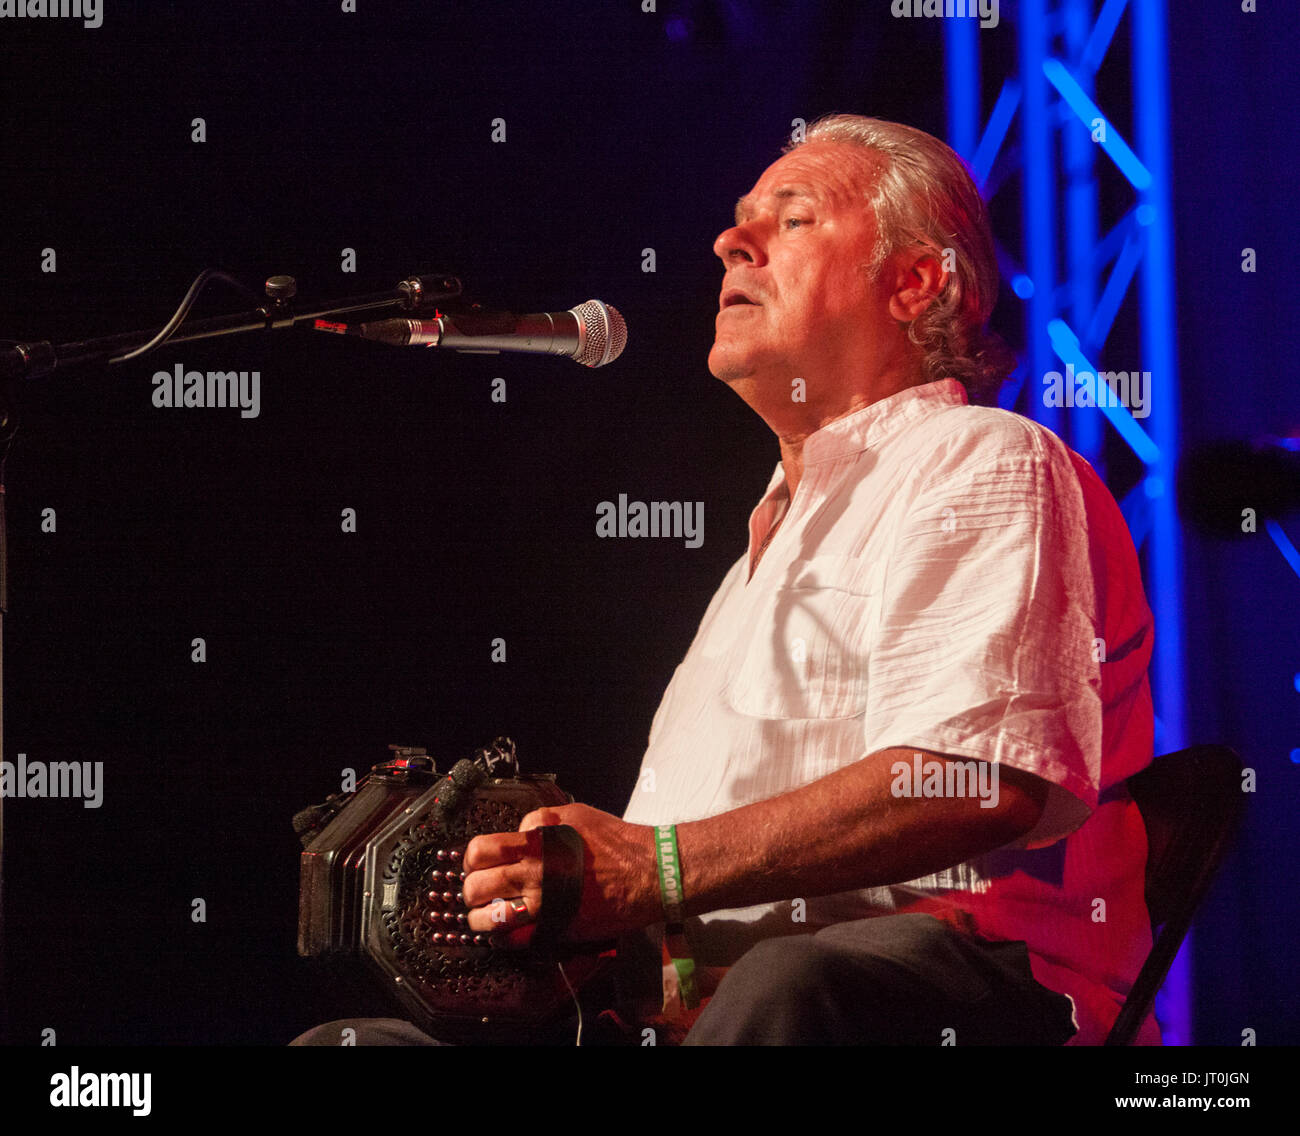 Sidmouth, 6th July 17 Geoff Lakeman on stage at the Sidmouth Folk Week Festival. The event continues until the 11th August. Credit: Photo Central/Alamy Live News Stock Photo